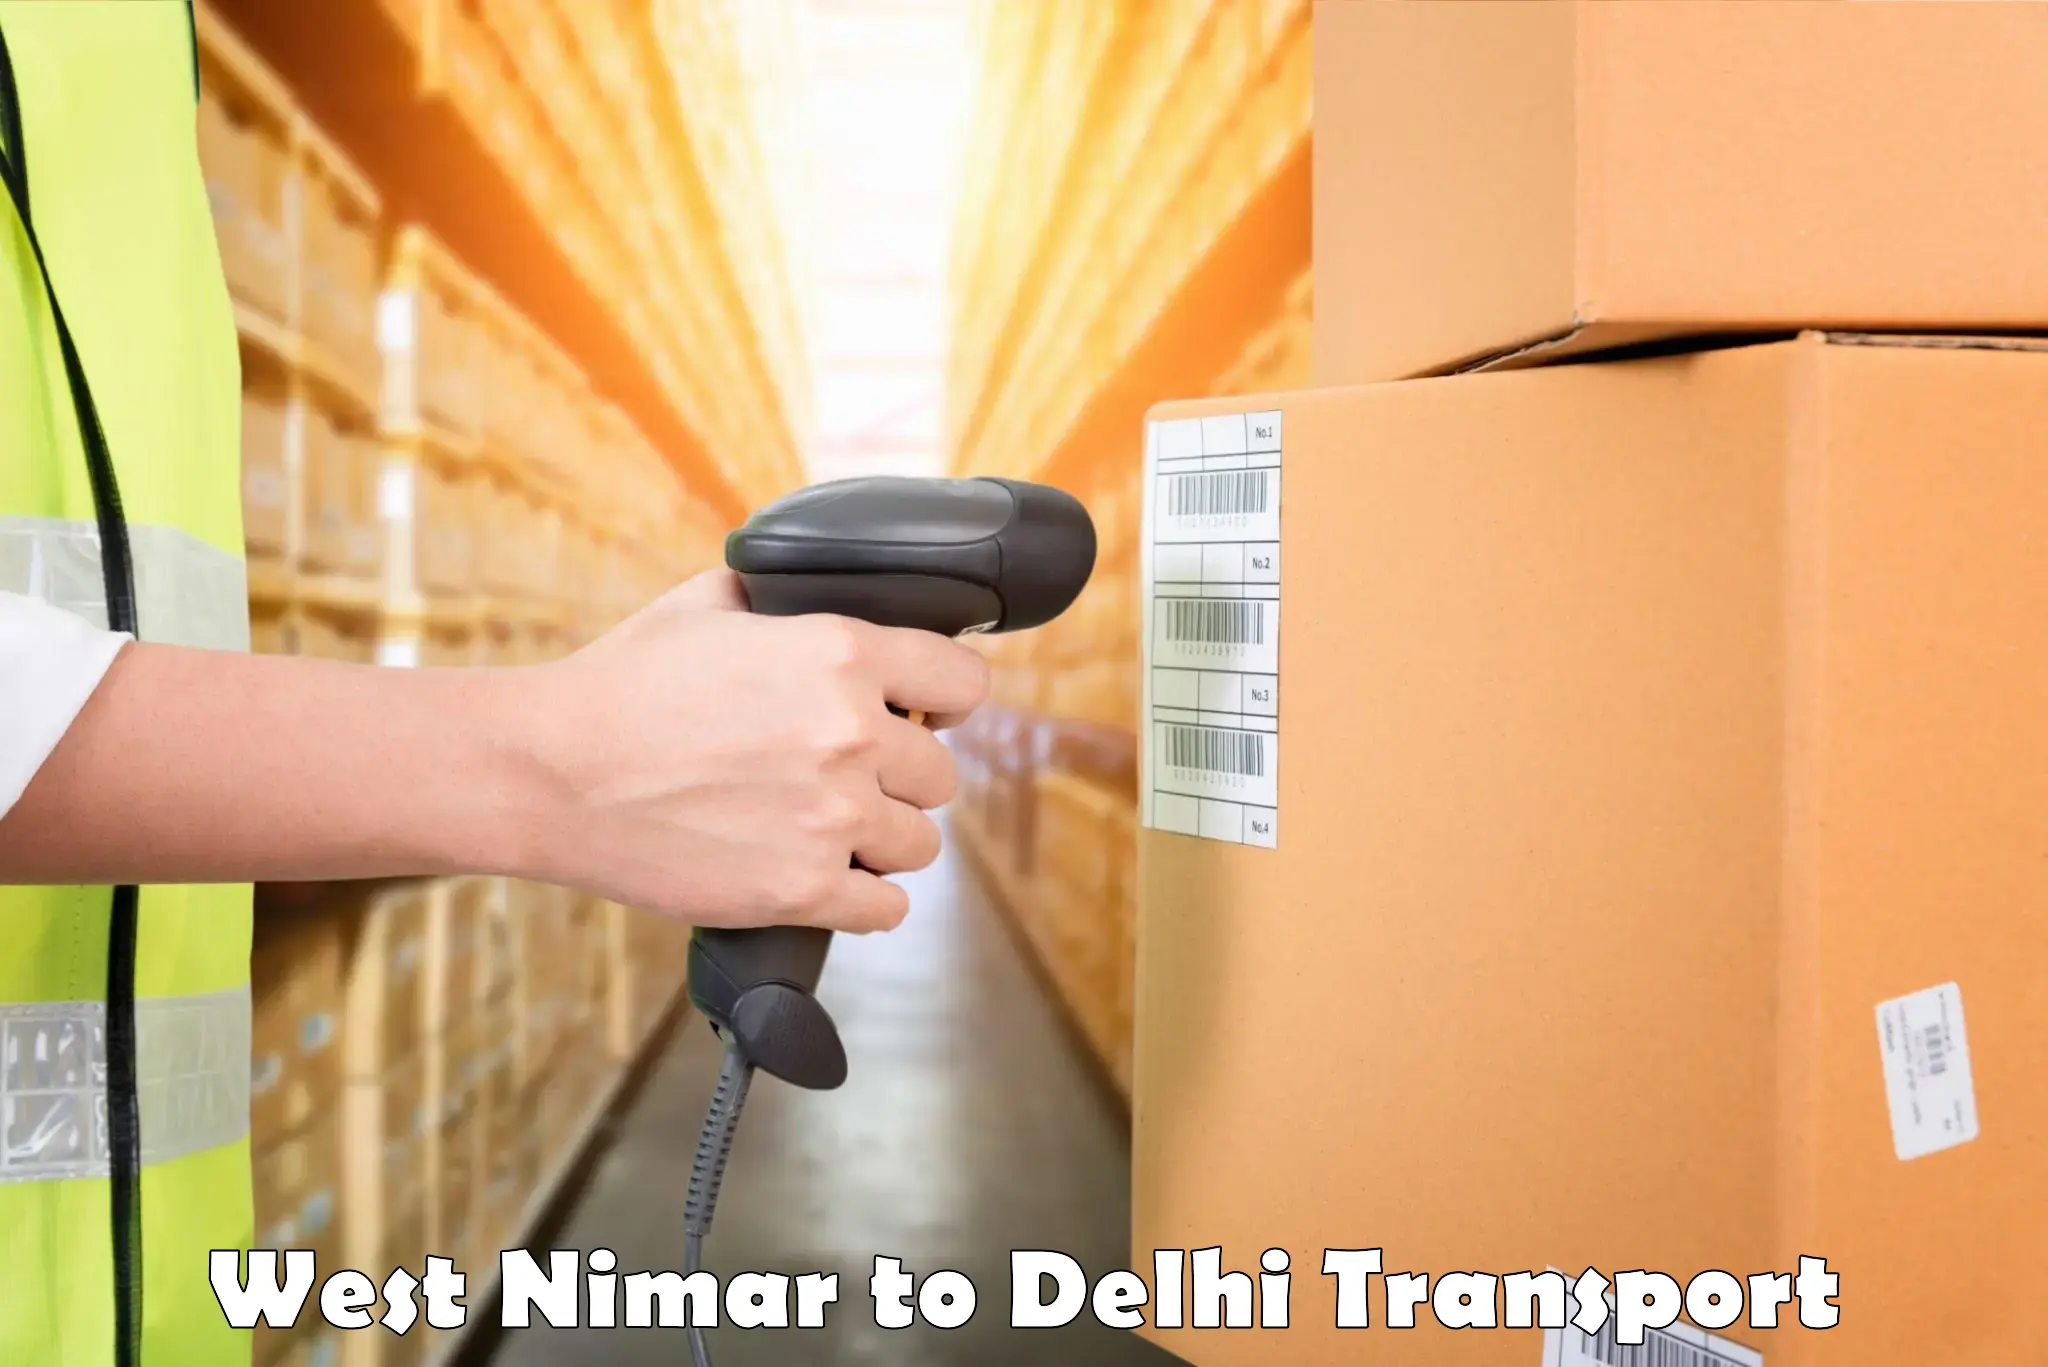 Container transport service West Nimar to Jhilmil